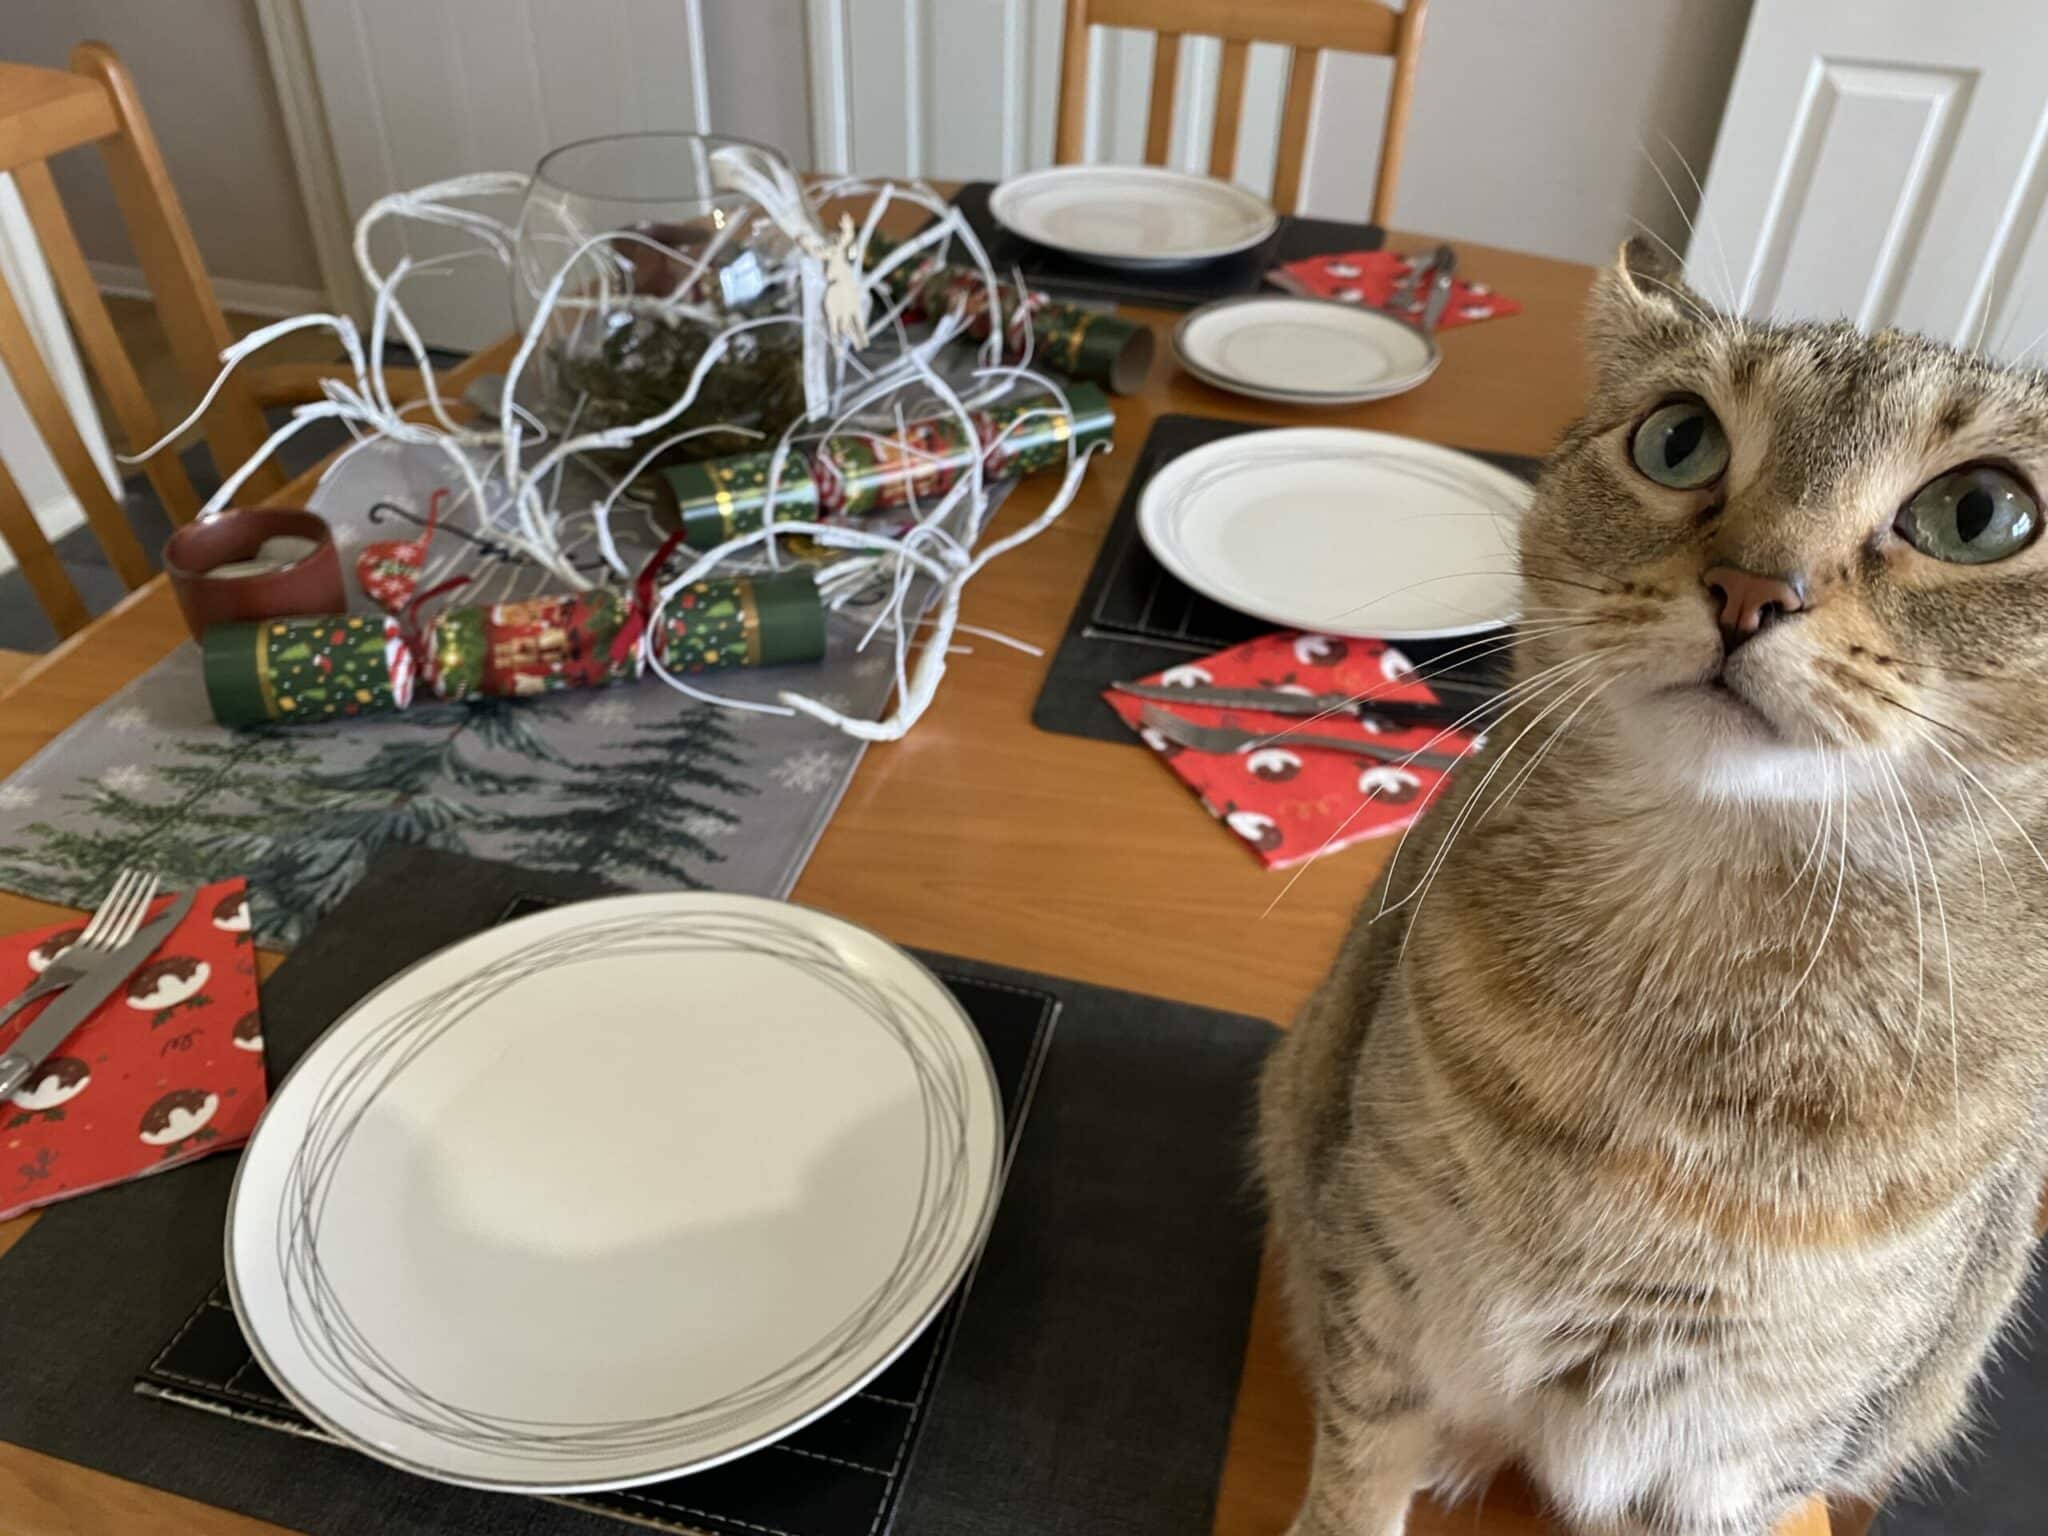 Tiller ponders what might need knocking off the holiday table